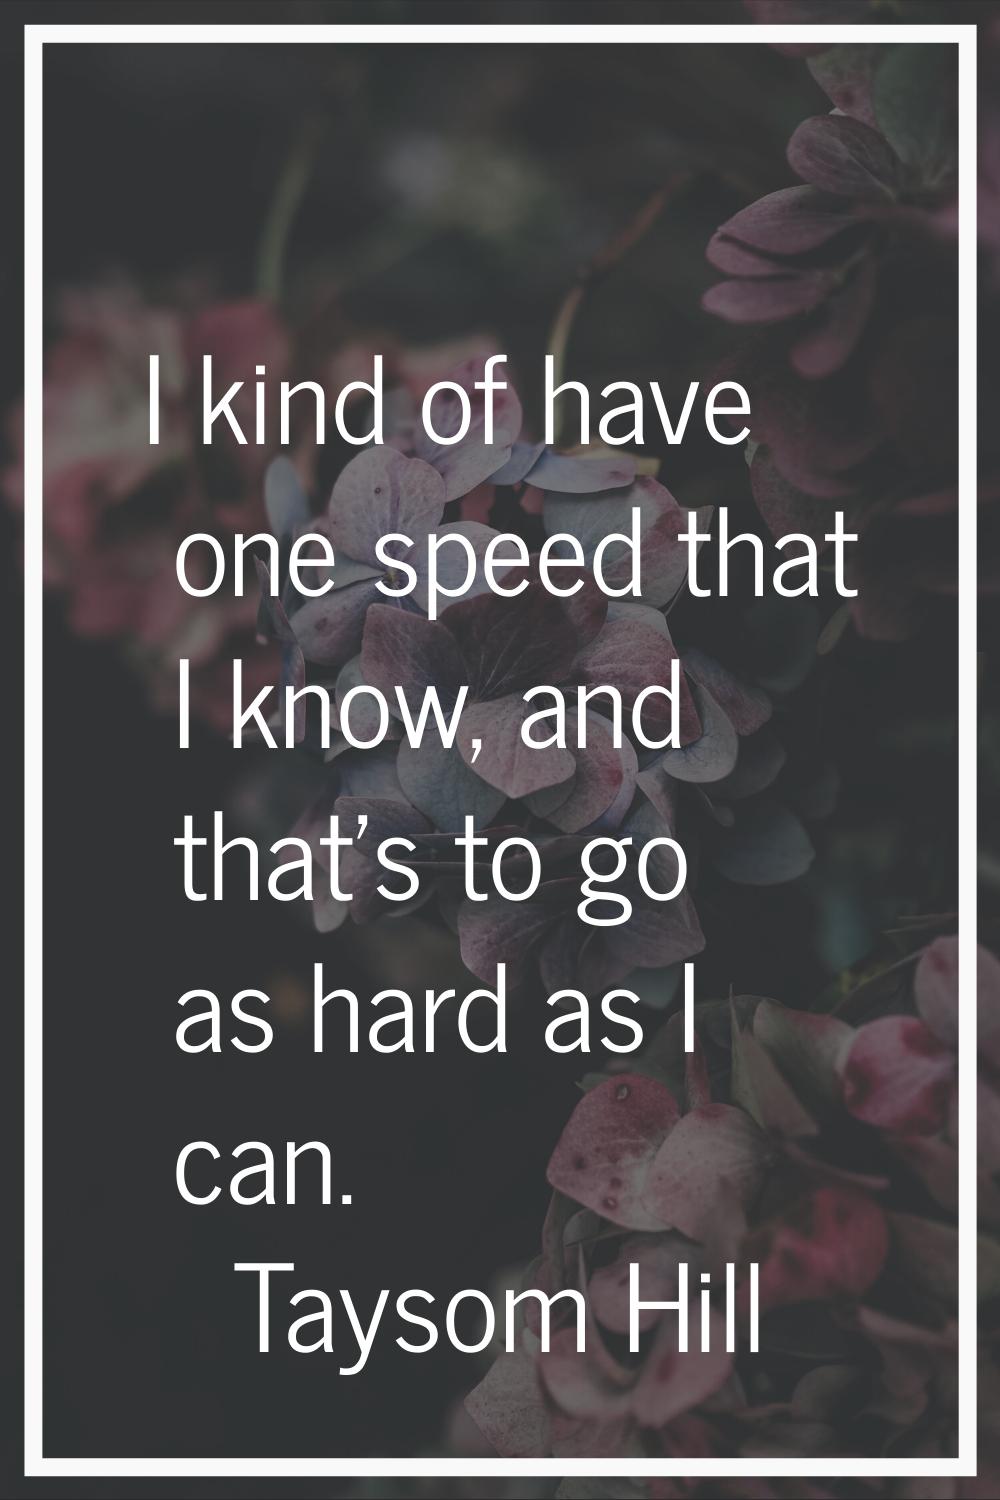 I kind of have one speed that I know, and that's to go as hard as I can.